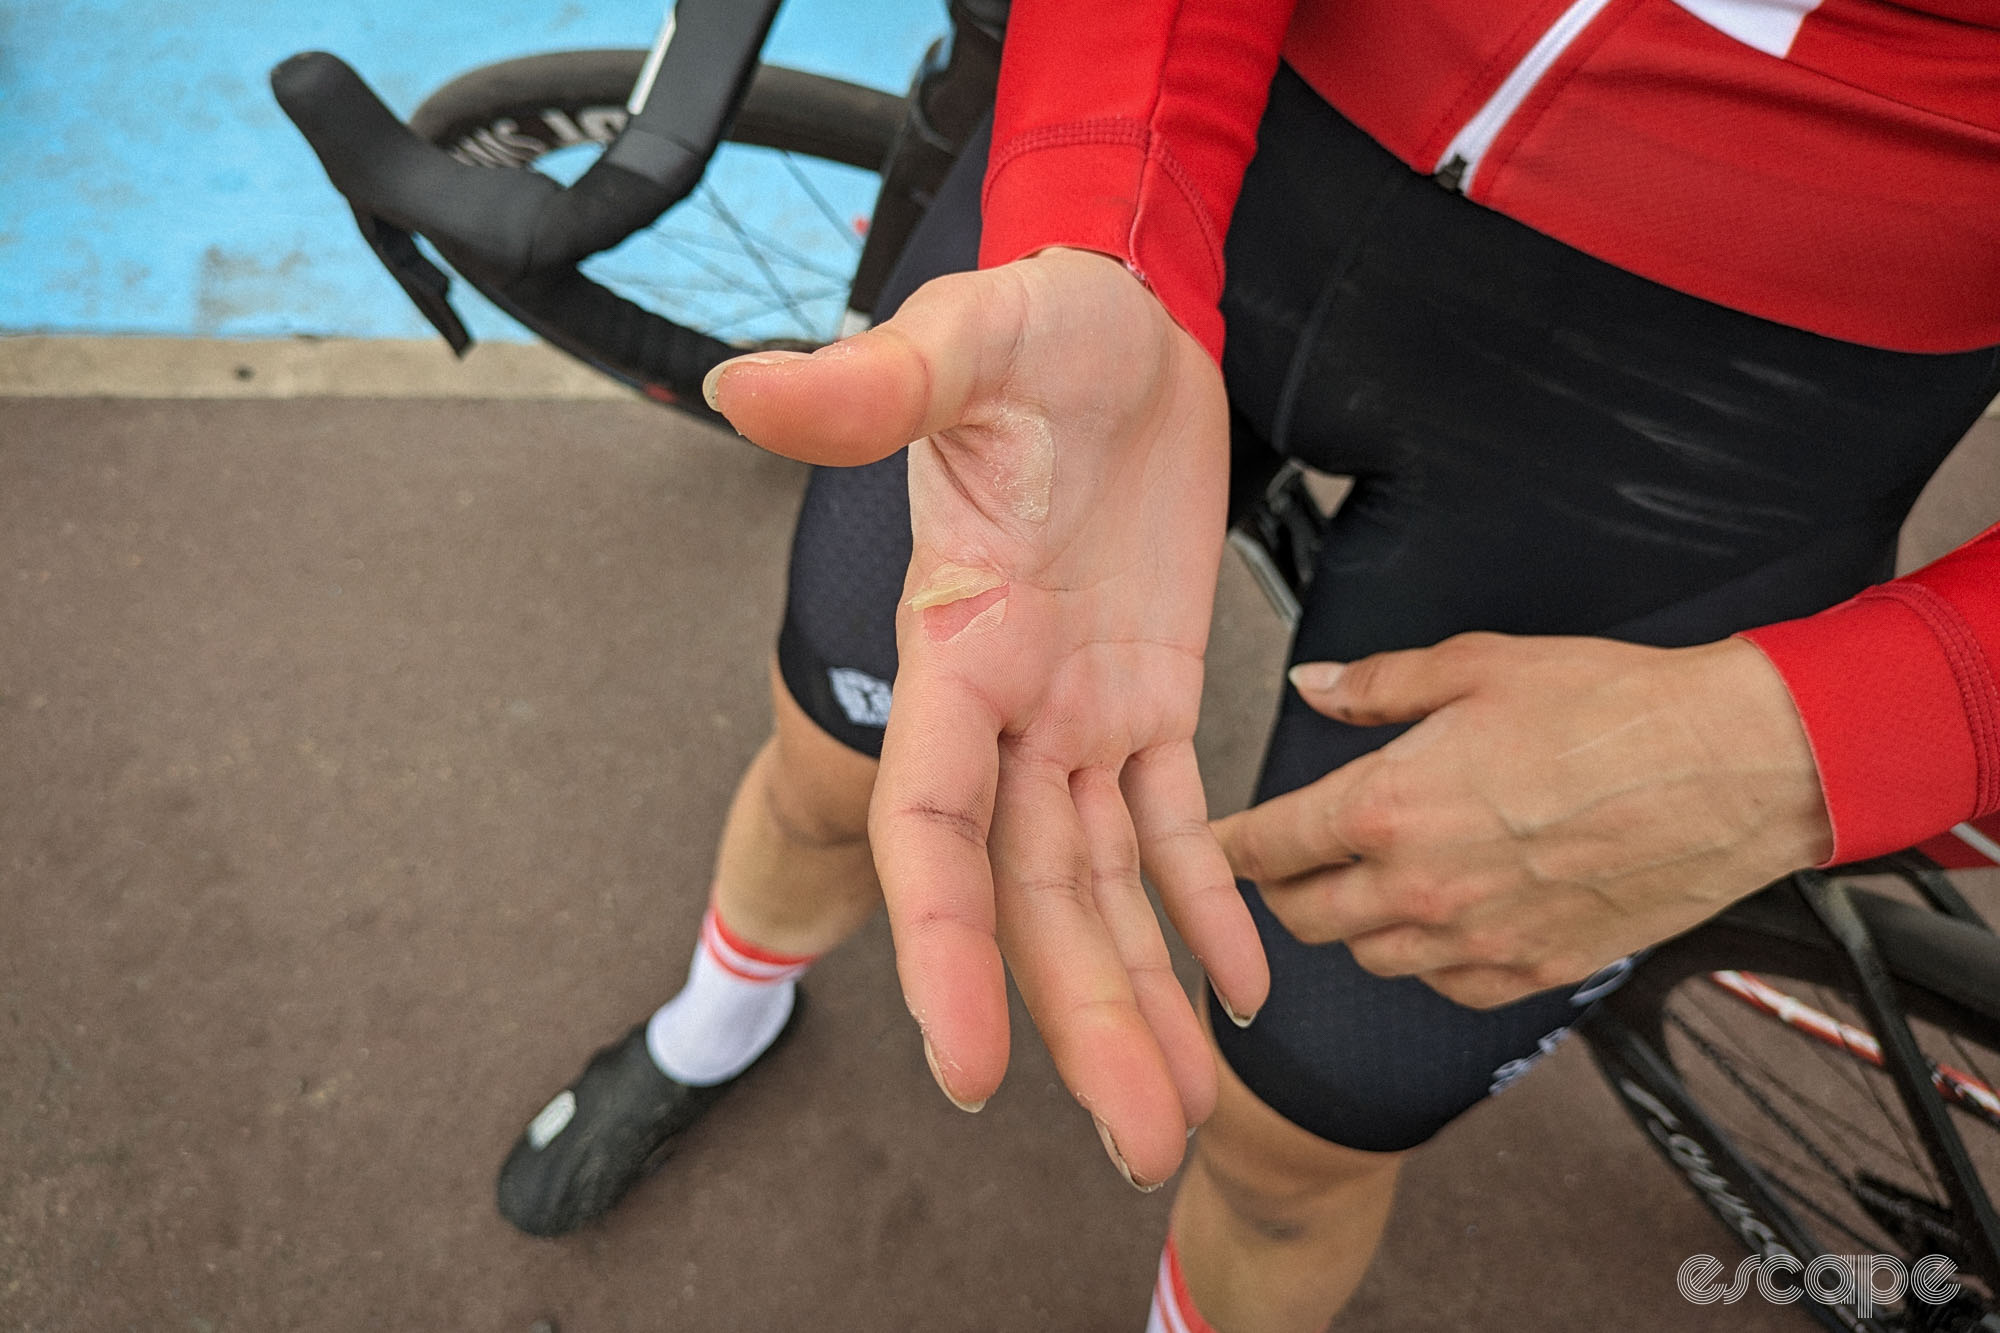 Rebecca Koerner has two large peeling blisters on her right hand between thumb and forefinger where you would grip a brake hood.